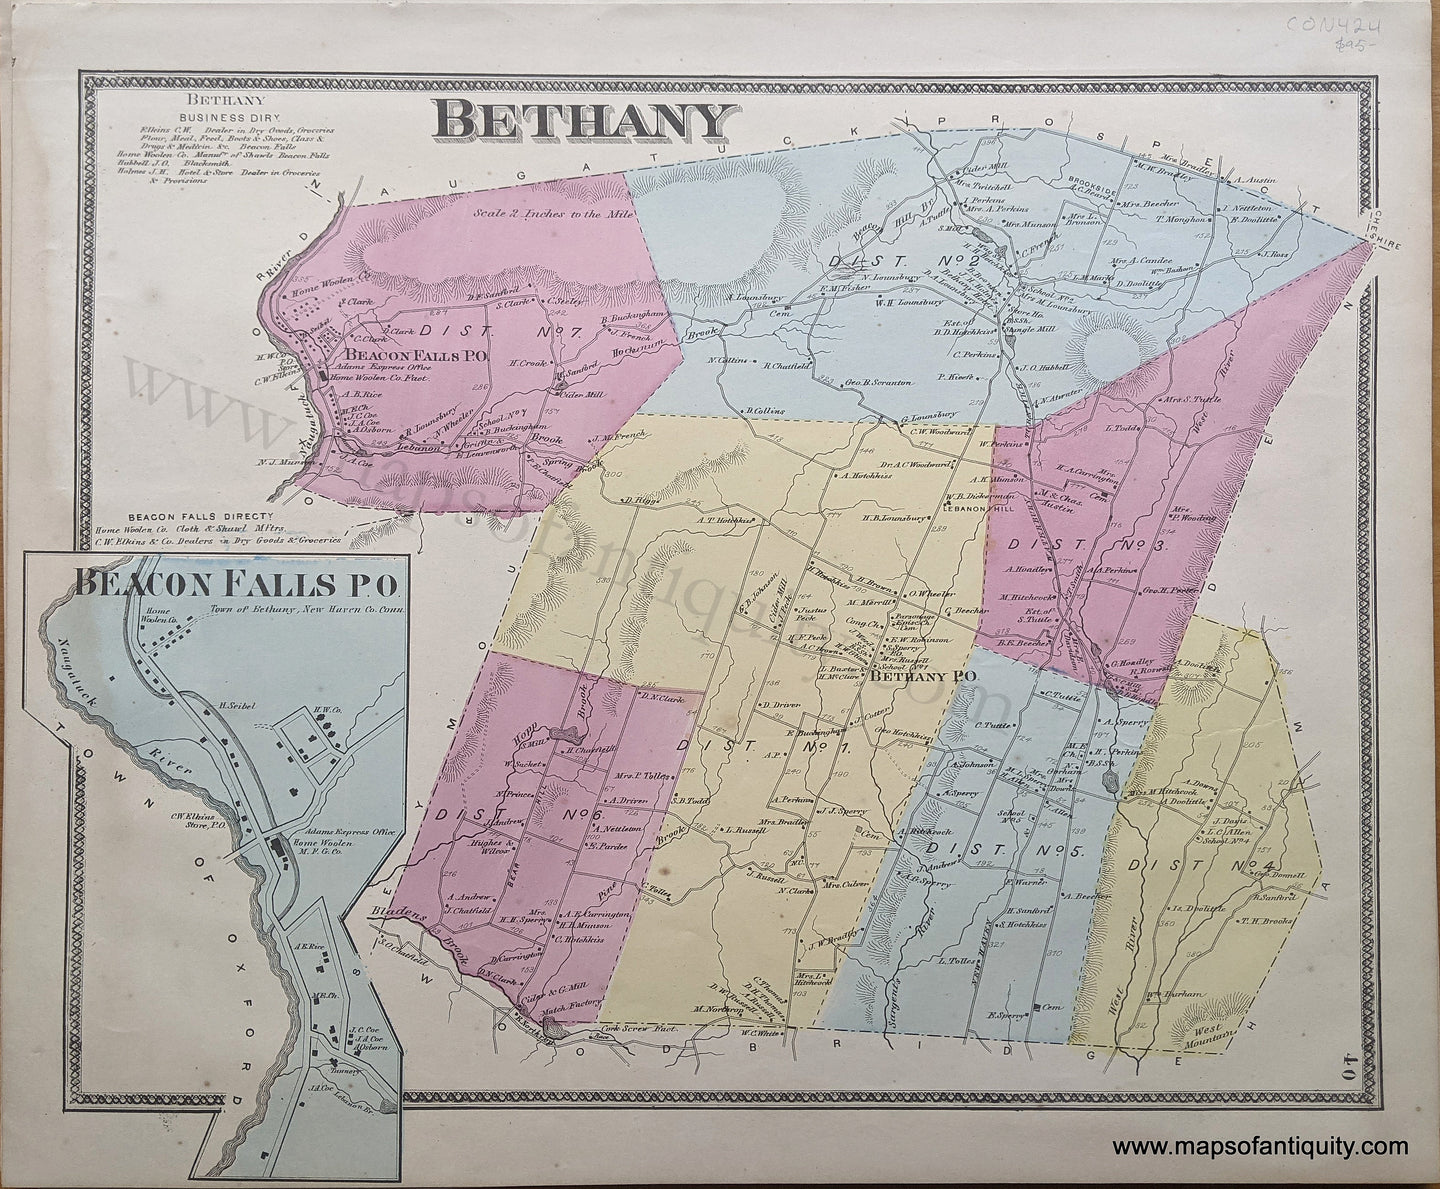 Genuine Antique Hand Colored Map-Bethany  (CT) -1868-Beers-Maps-Of-Antiquity-1800s-19th-century